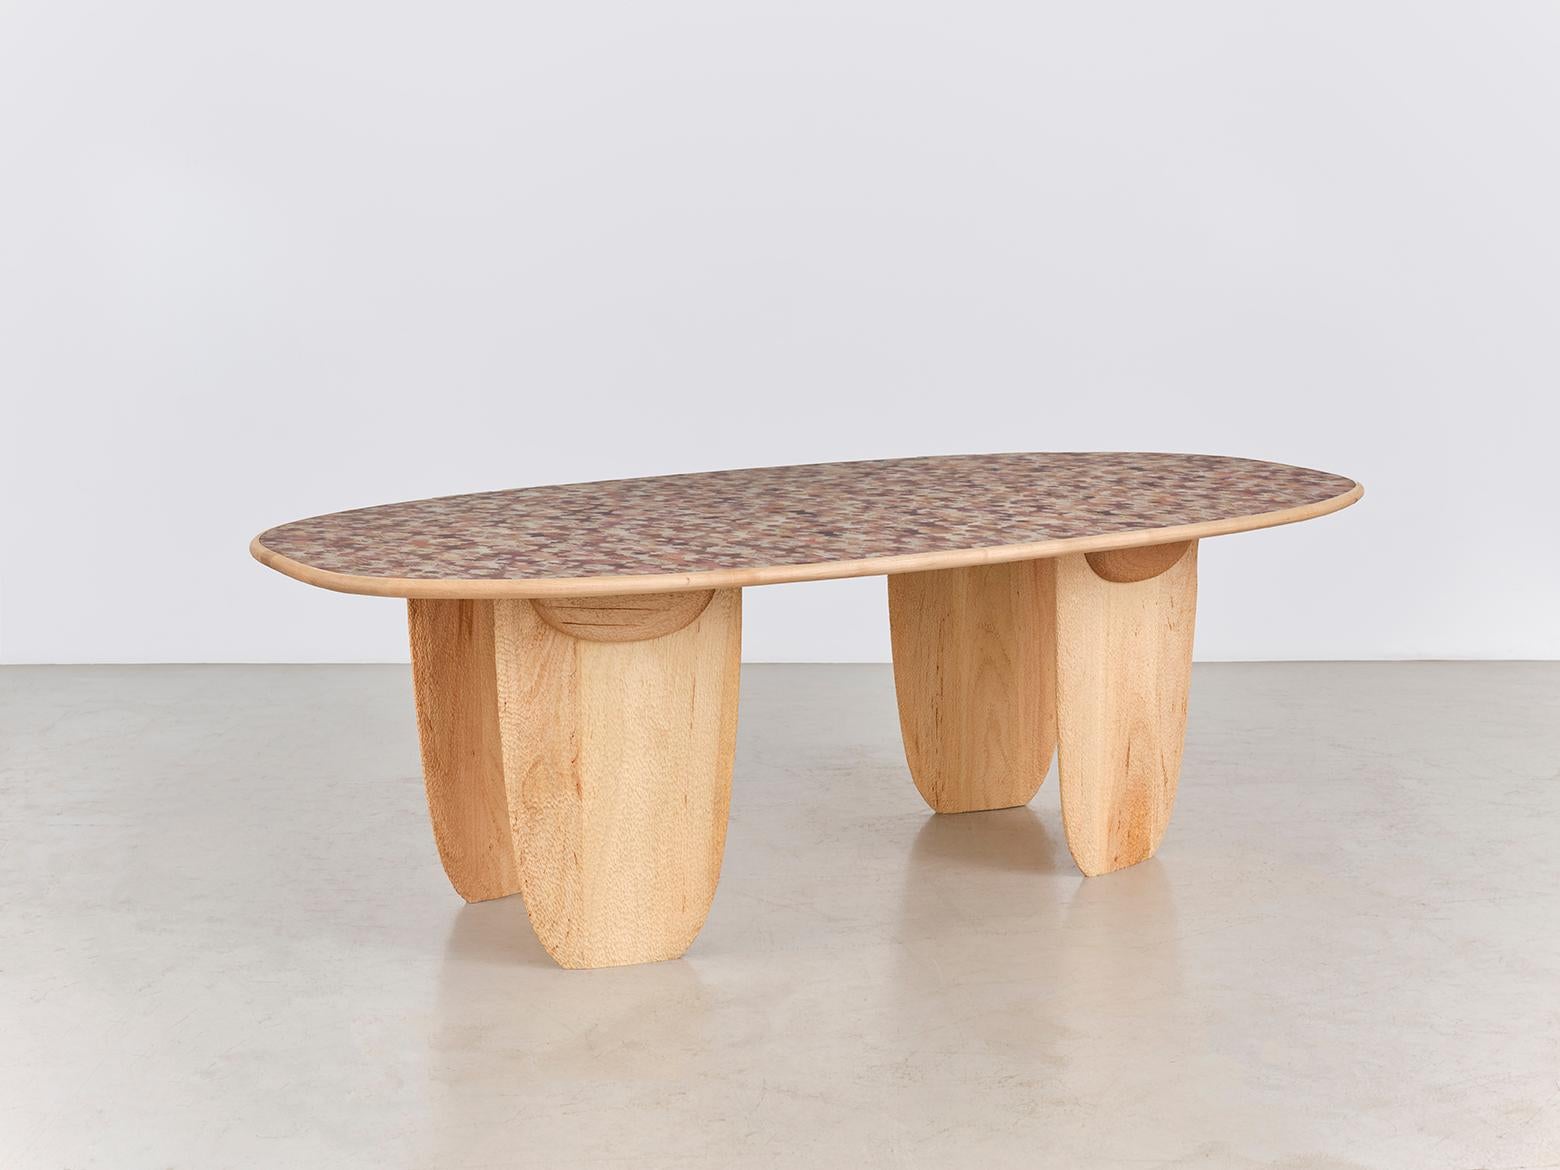 Fernando Laposse [Mexican, b. 1988]
Totomoxtle Snake Dining Table
2021
Heirloom corn husk marquetry on maple, eco resin
29.5 x 85.5 x 45.25
75 x 217 x 115 cm